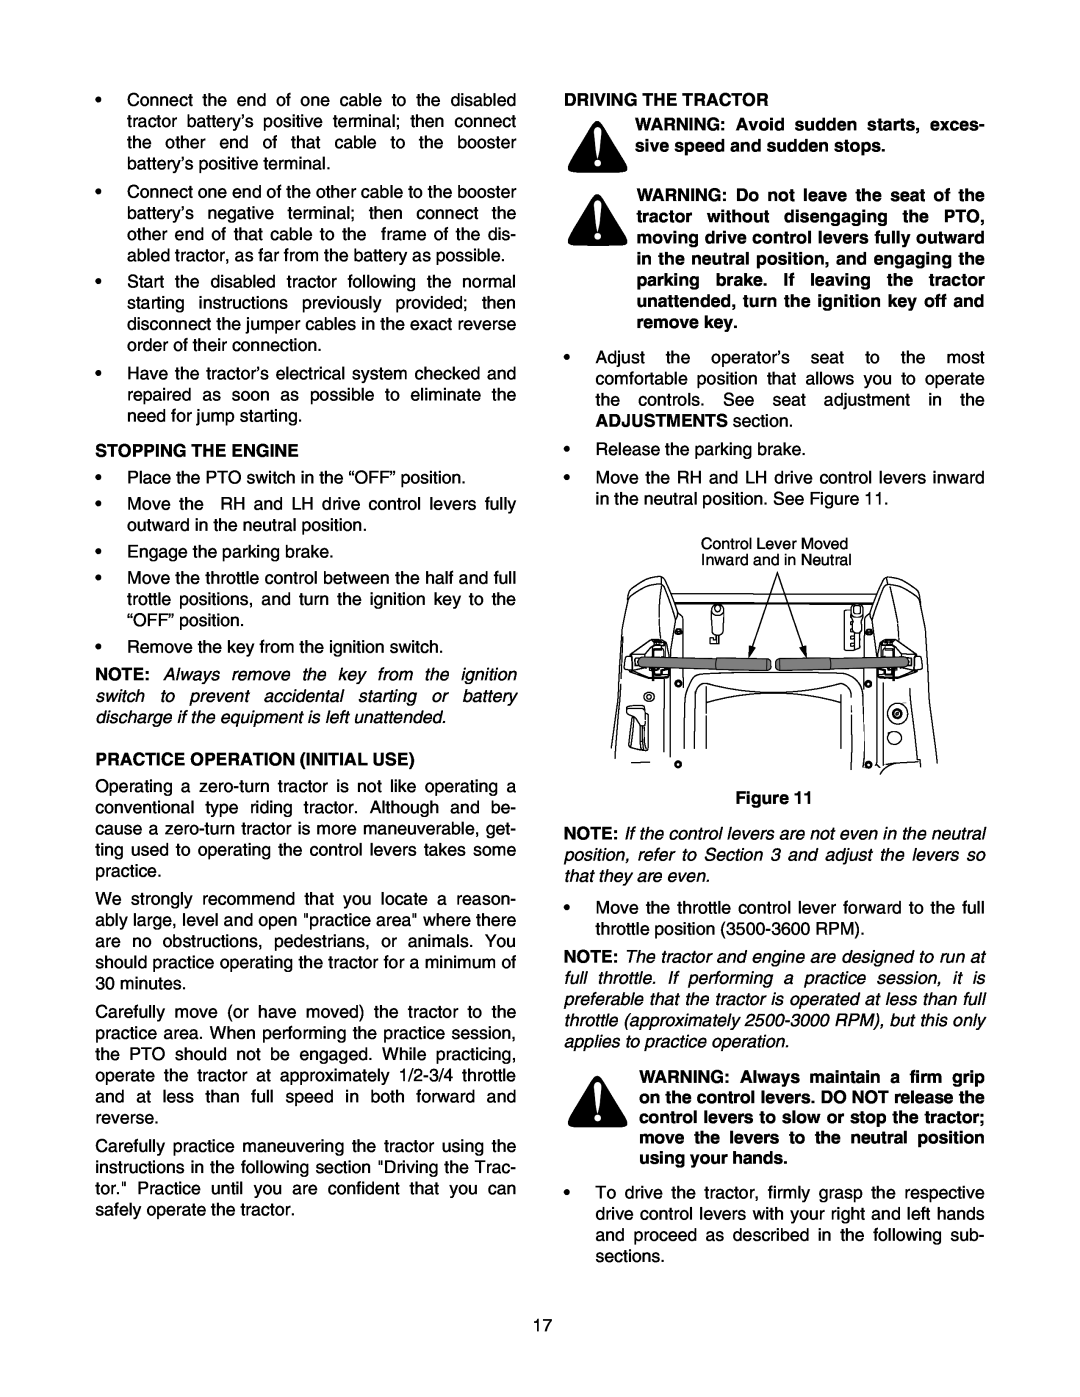 Troy-Bilt RZT 50 manual Stopping The Engine, Practice Operation Initial Use, Driving The Tractor 